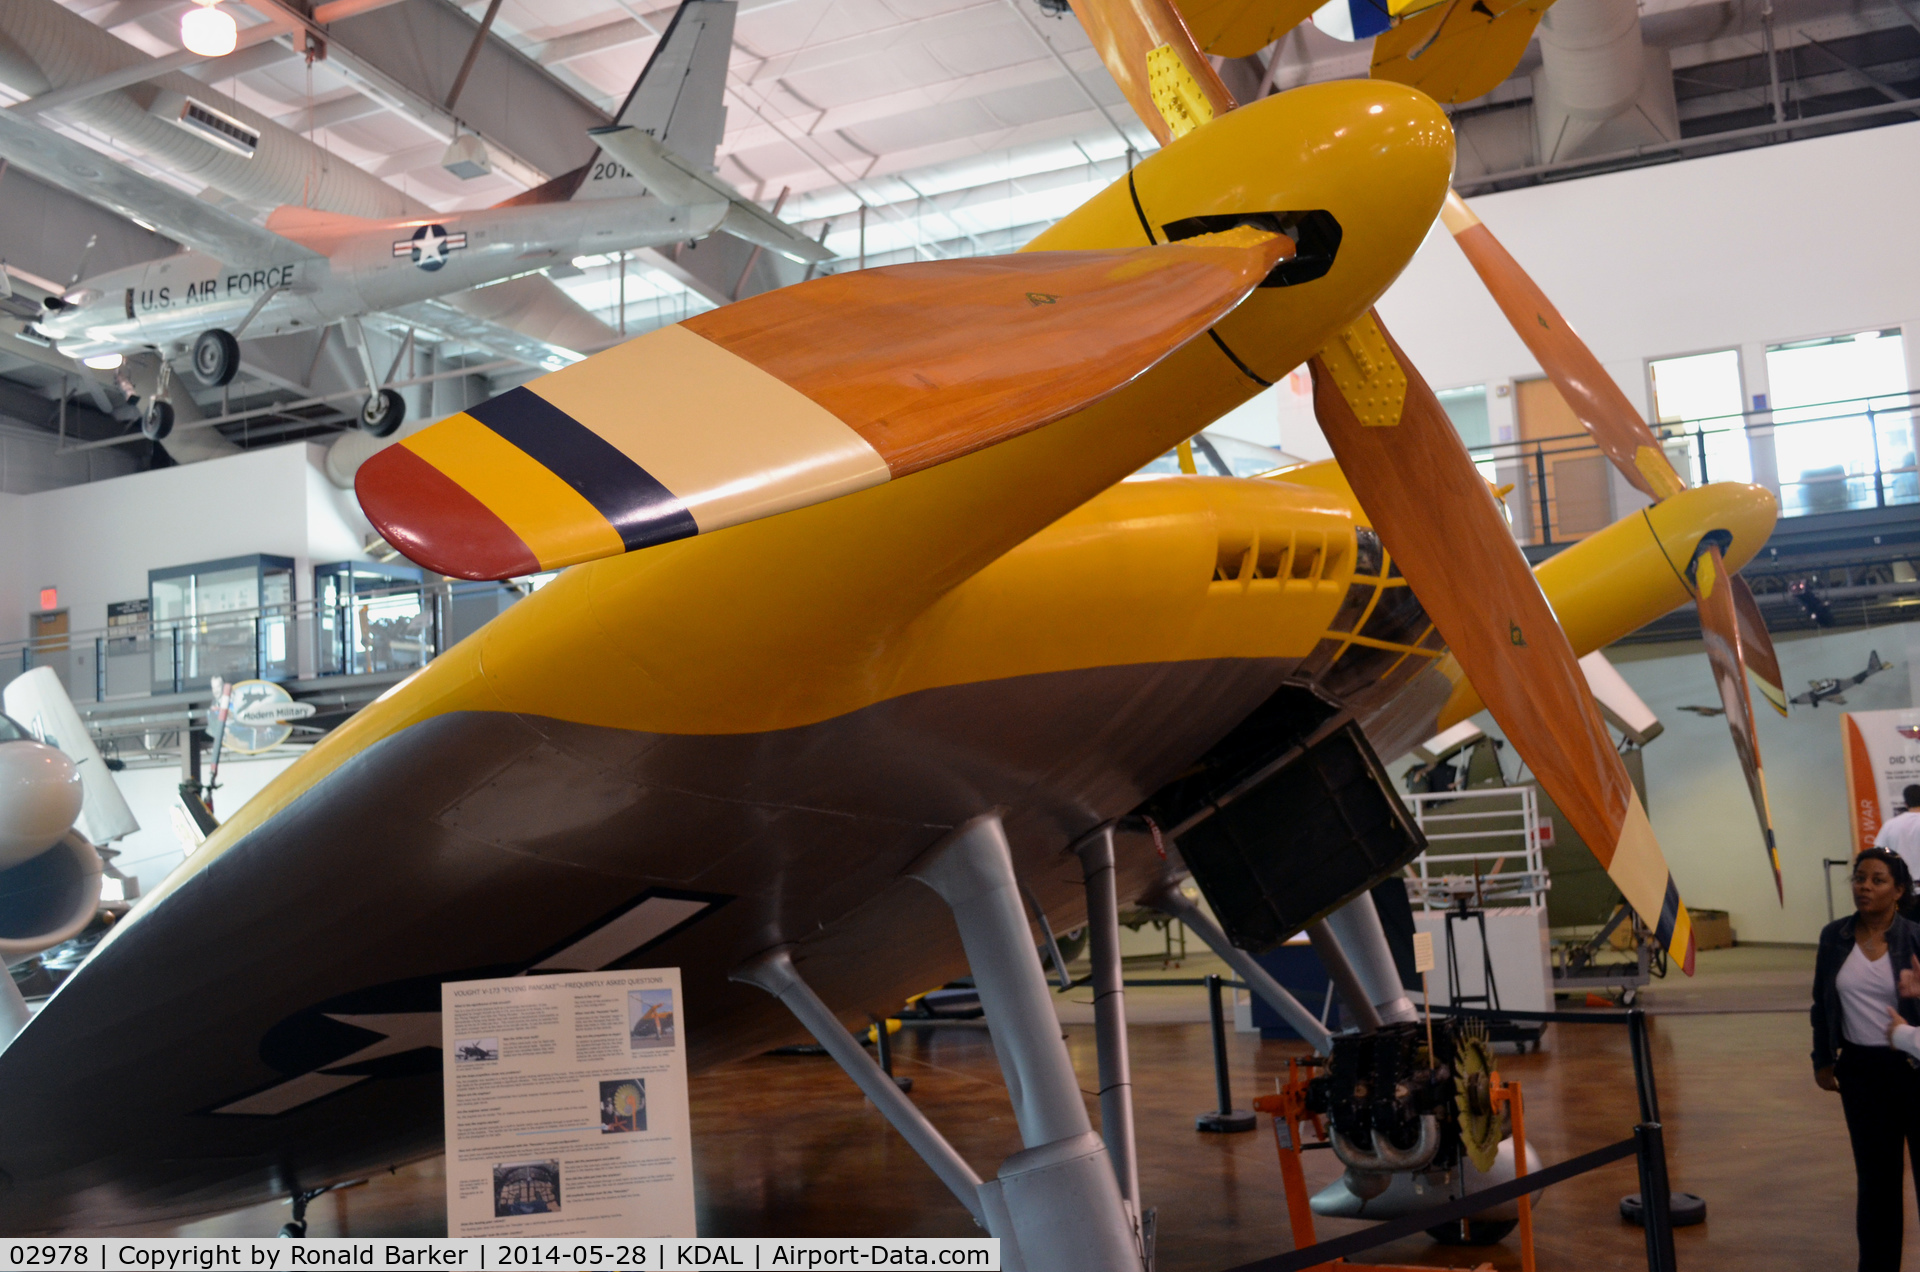 02978, 1942 Vought V-173 C/N 1, Frontiers of flight Museum DAL